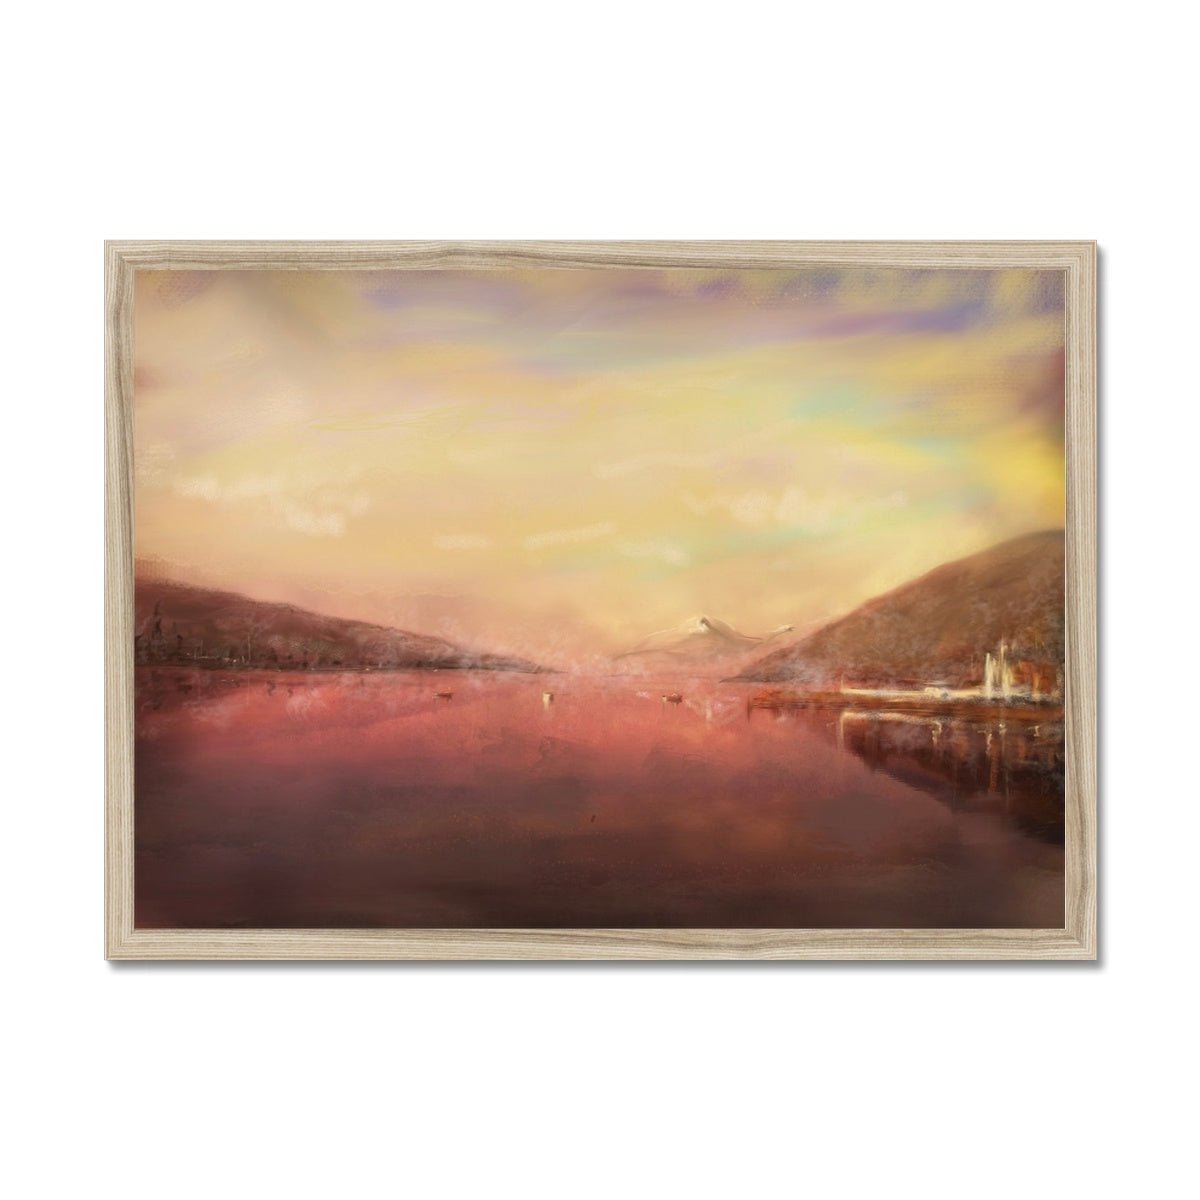 Loch Tay Painting | Framed Prints From Scotland-Framed Prints-Scottish Lochs & Mountains Art Gallery-A2 Landscape-Natural Frame-Paintings, Prints, Homeware, Art Gifts From Scotland By Scottish Artist Kevin Hunter